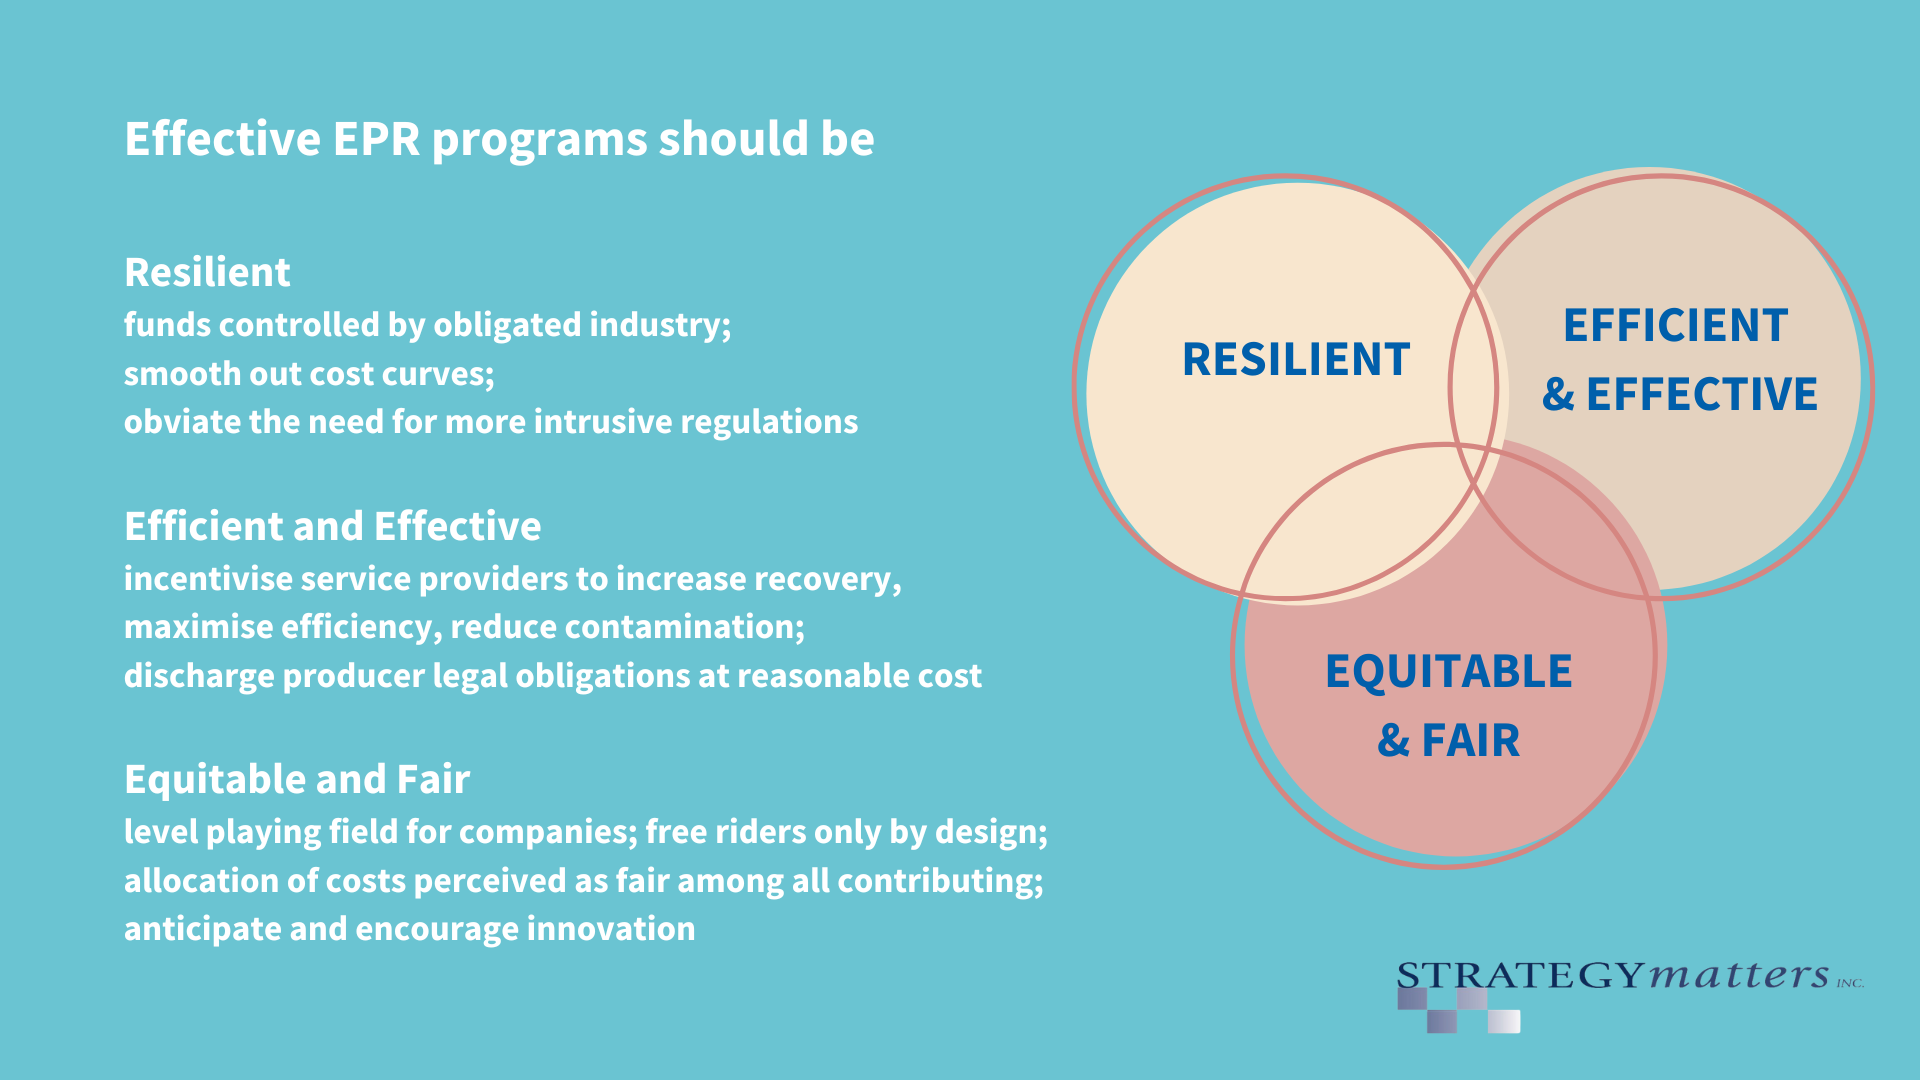 Effective EPR programmes should be resilient, efficient and effective, and equitable and fair